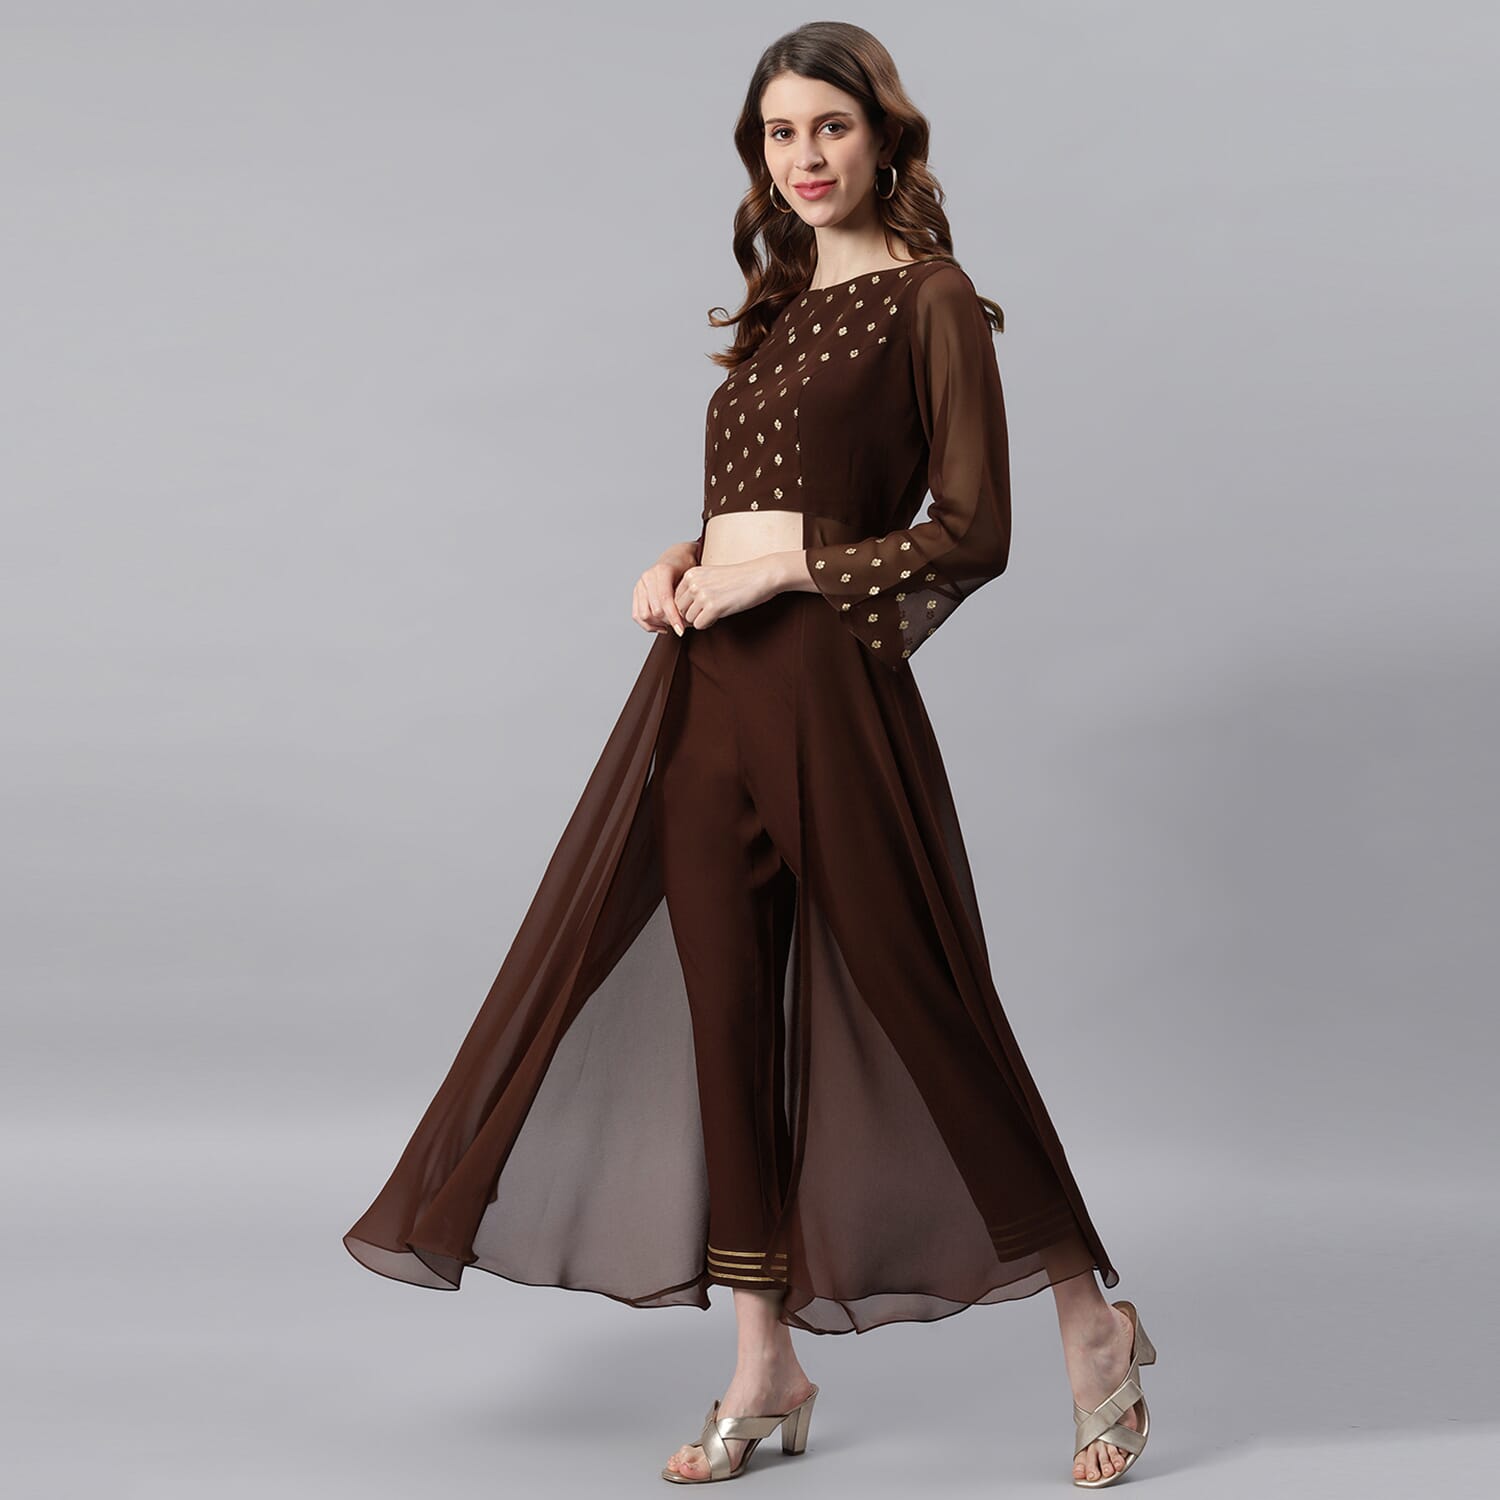 Janasya Indian Round Neck 3/4 Sleeve Ethnic Motifs Brown Georgette Top With Pant For Women - image 4 of 8